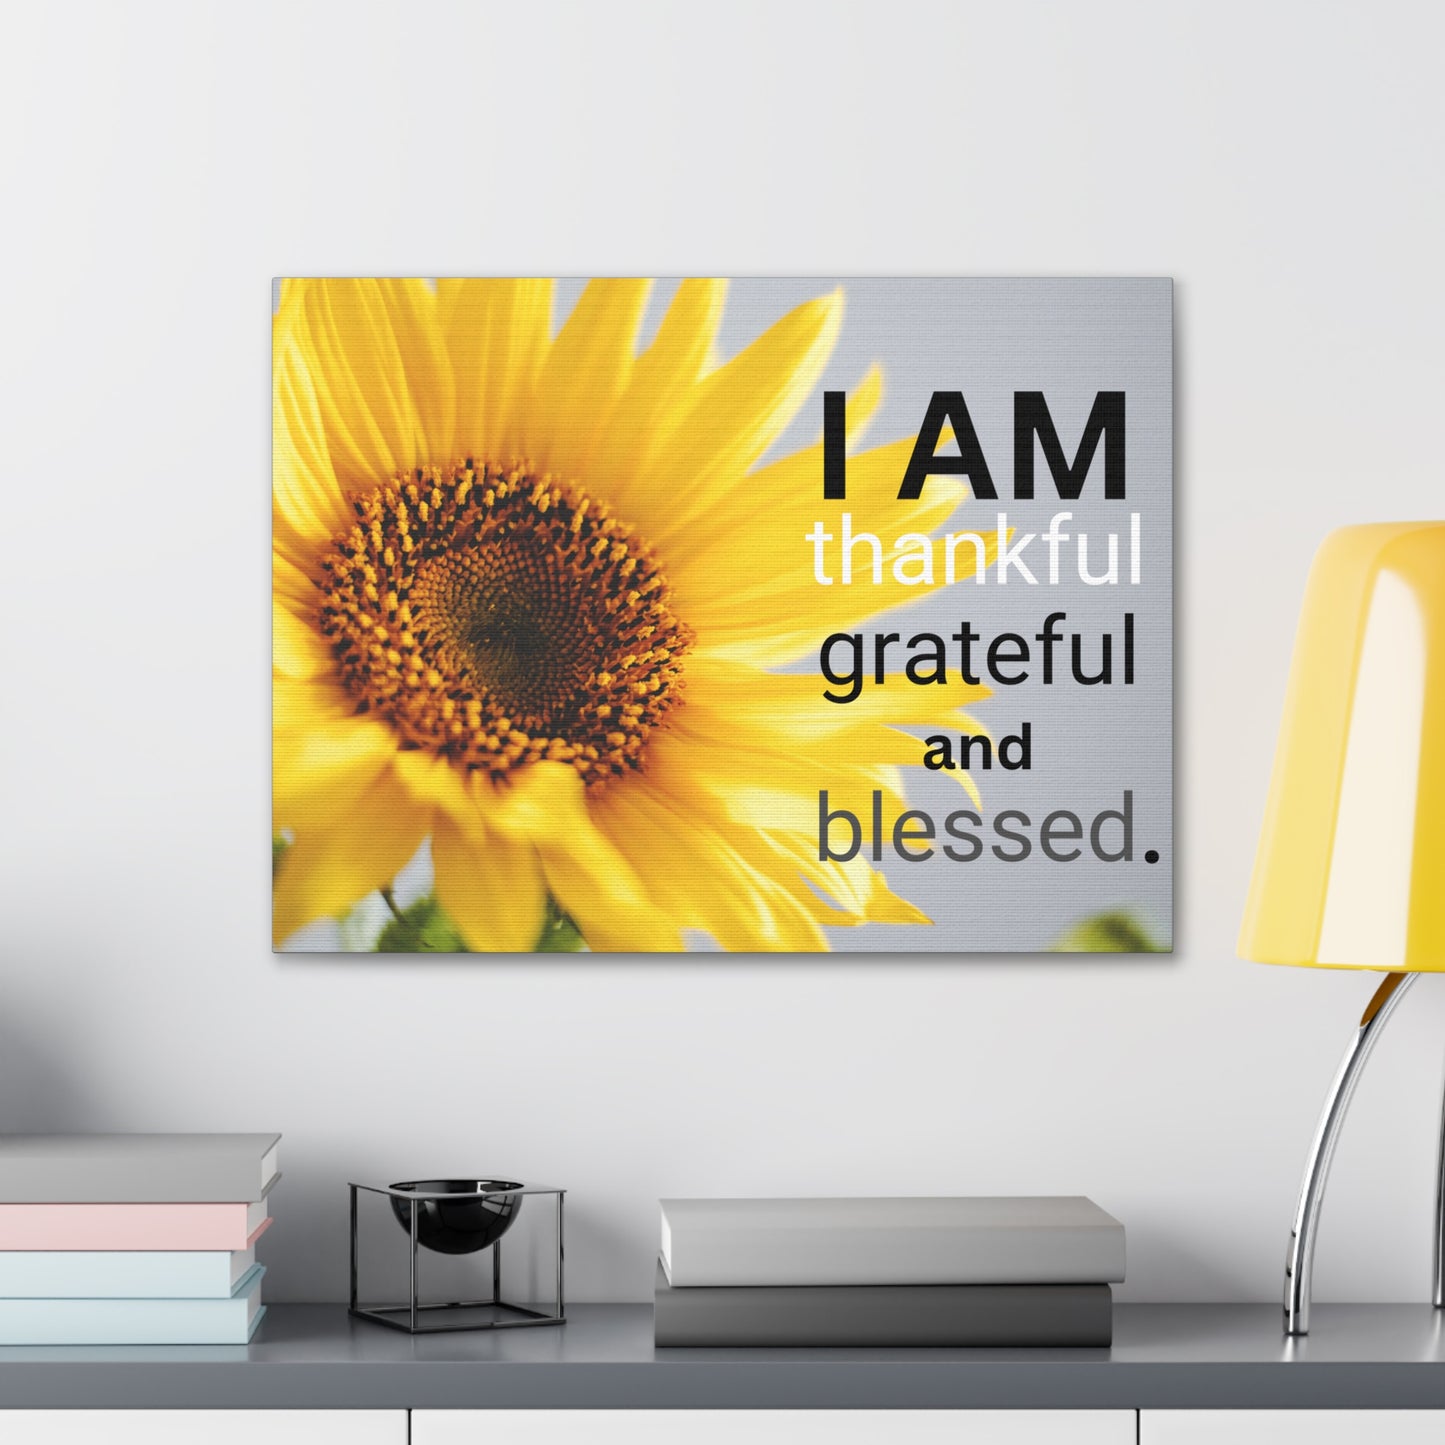 Christian Wall Art: I am Thankful, Grateful and Blessed (Wood Frame Ready to Hang)